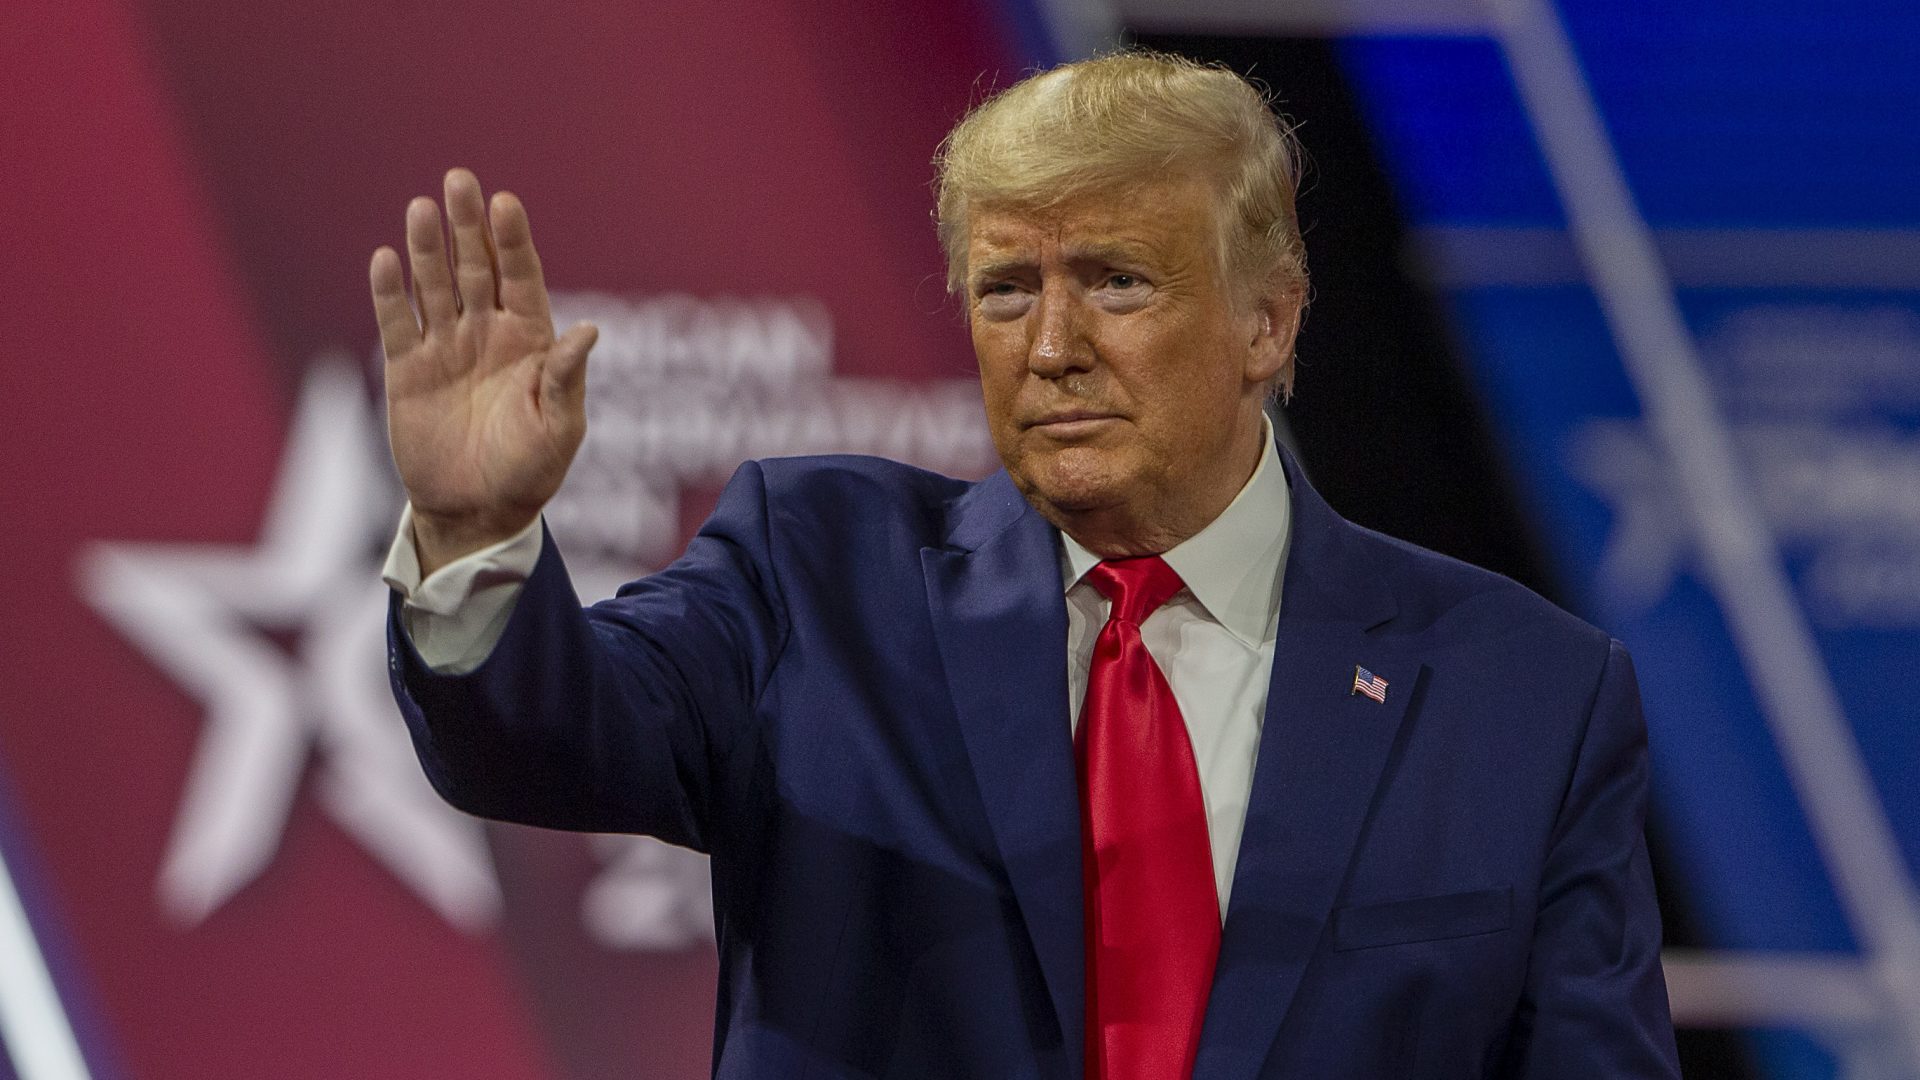 NATIONAL HARBOR, MARYLAND - FEBRUARY 29: President Donald Trump acknowledges the crowd during the annual Conservative Political Action Conference (CPAC) at Gaylord National Resort & Convention Center February 29, 2020 in National Harbor, Maryland. Conservatives gather at the annual event to discuss their agenda.  (Photo by Tasos Katopodis/Getty Images)